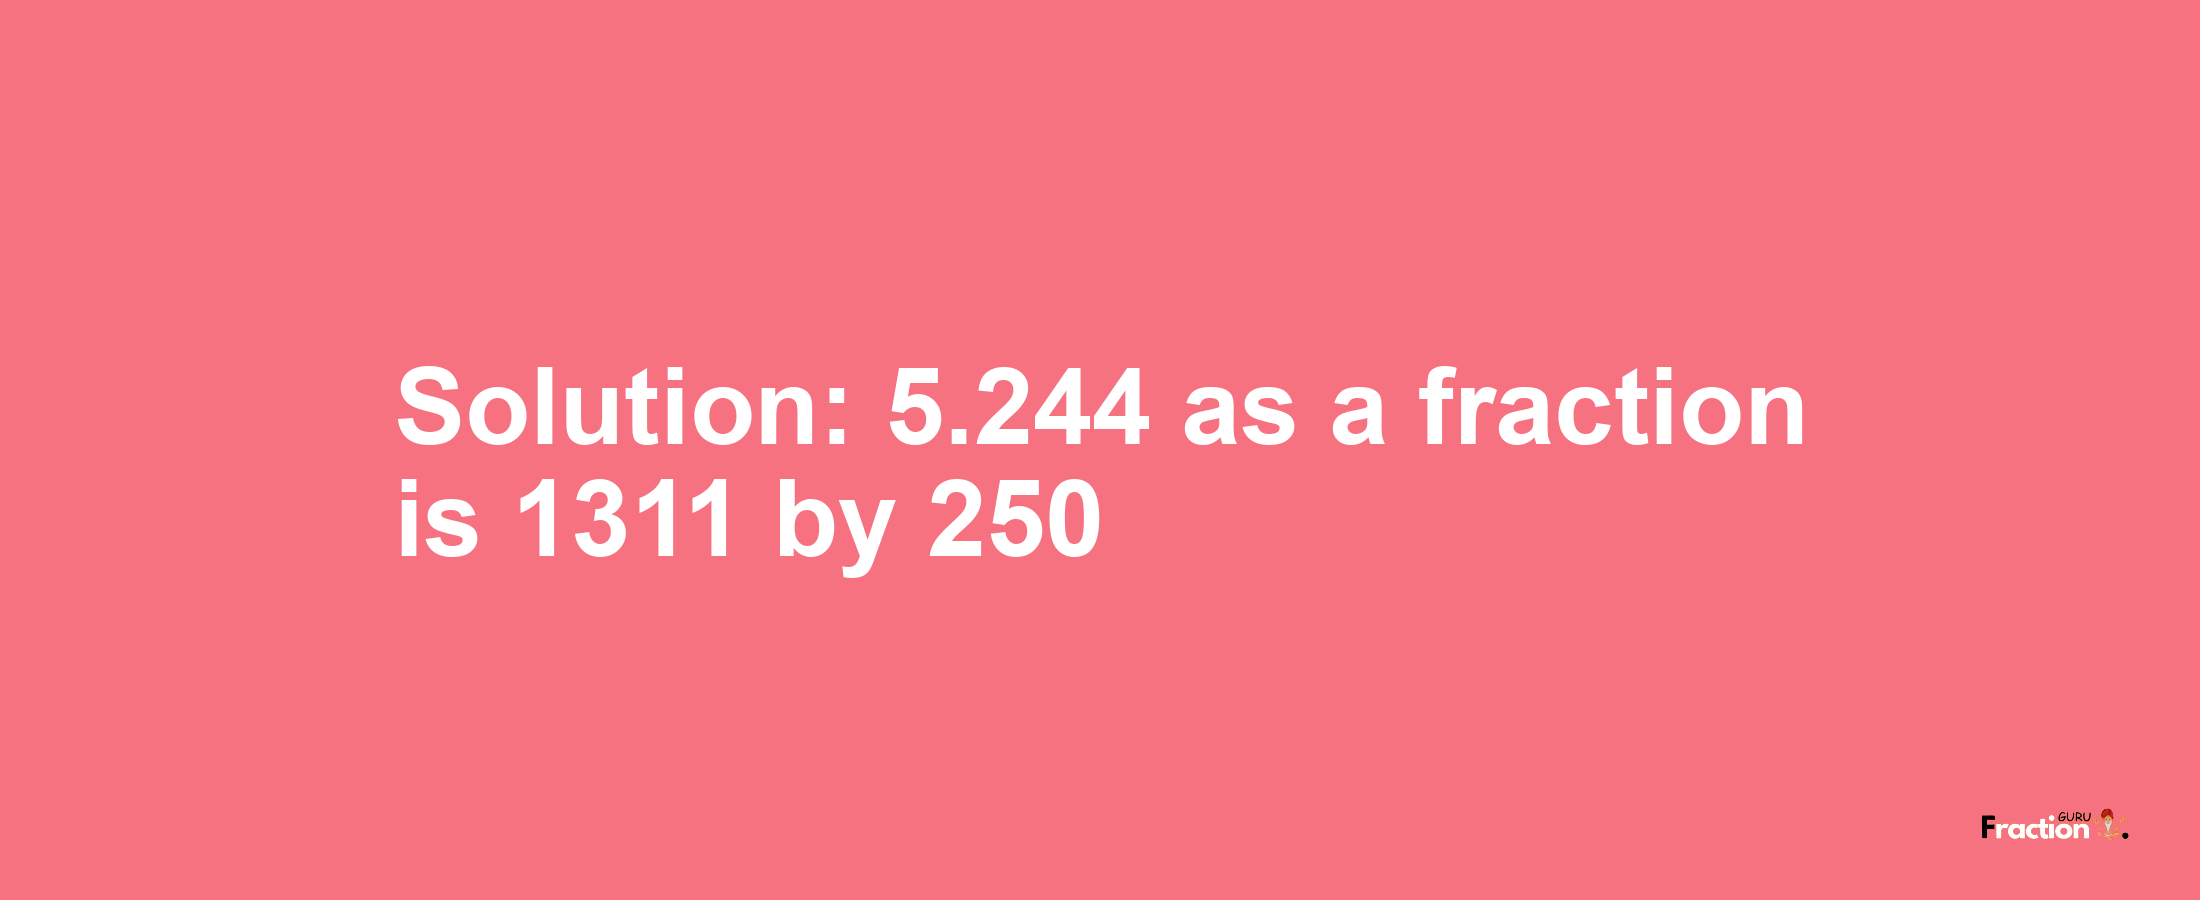 Solution:5.244 as a fraction is 1311/250